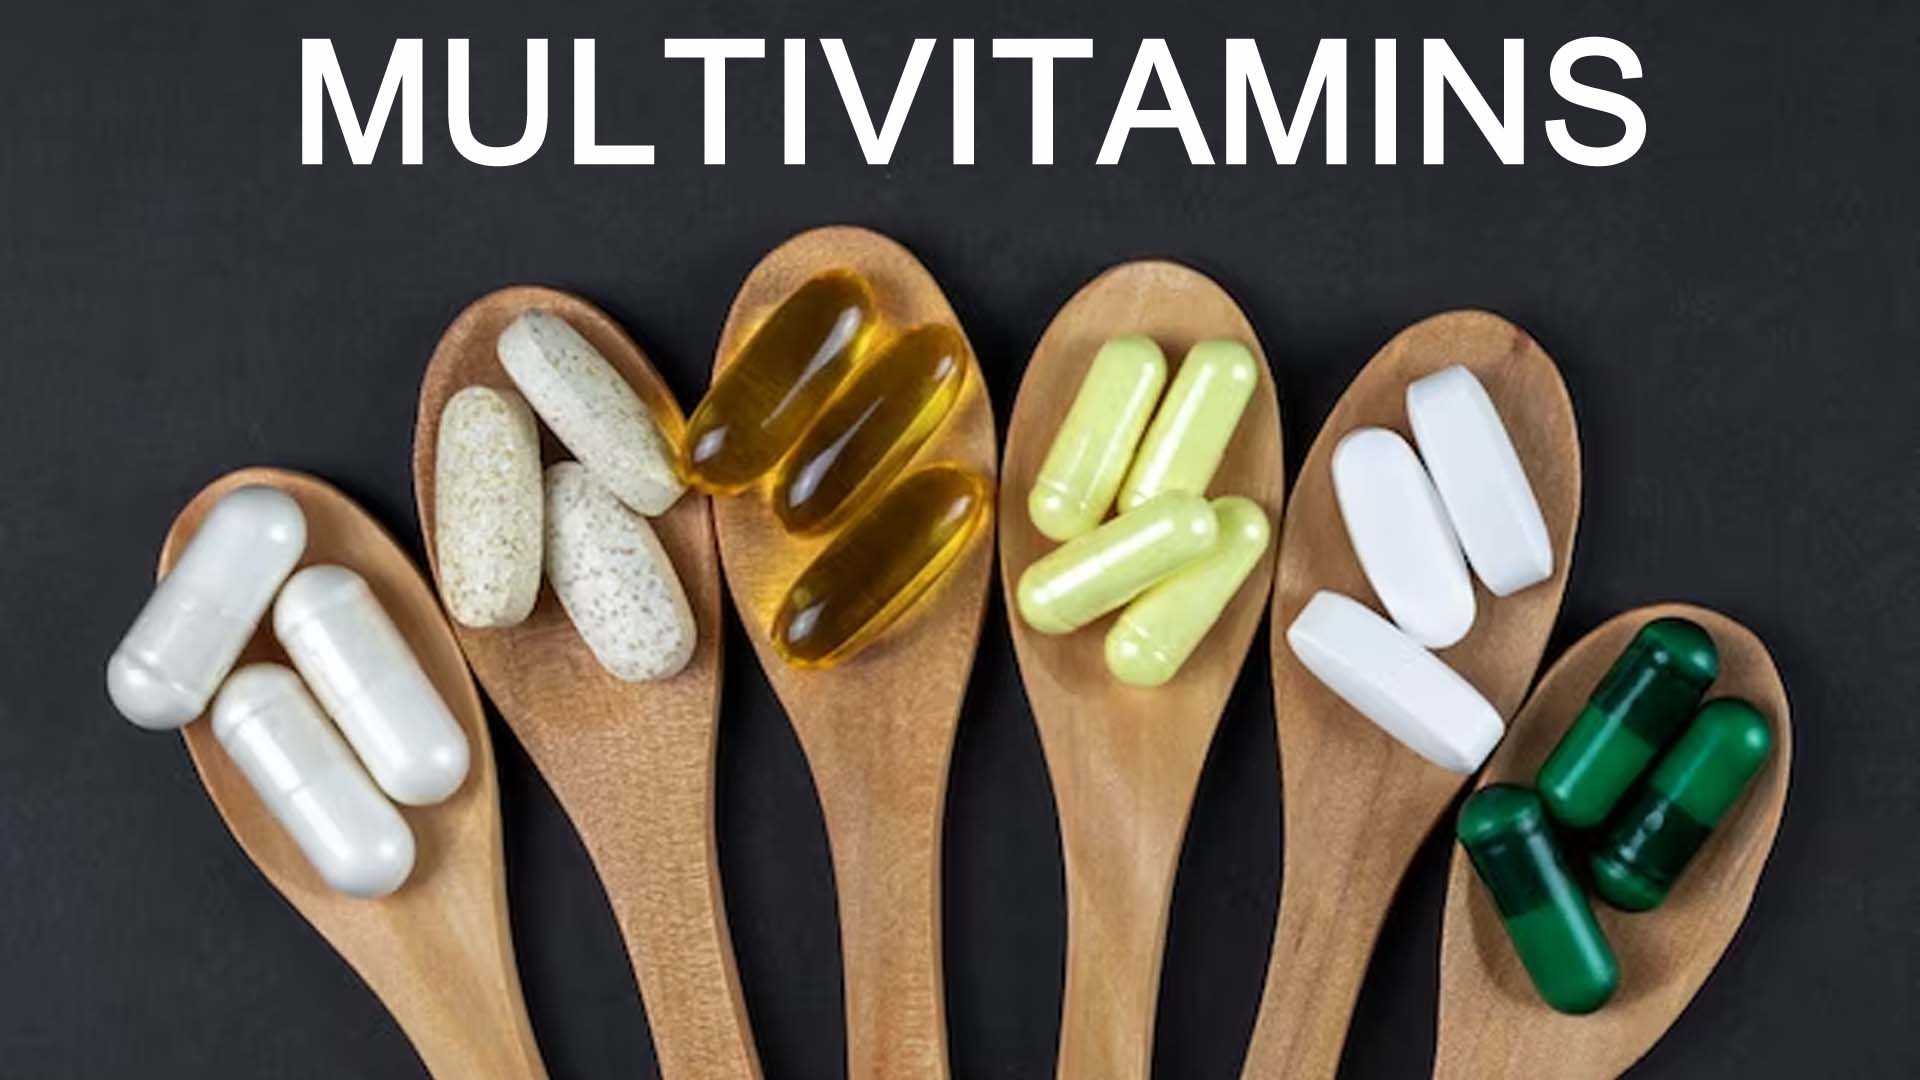 Can Multivitamins Cause Weight Gain?